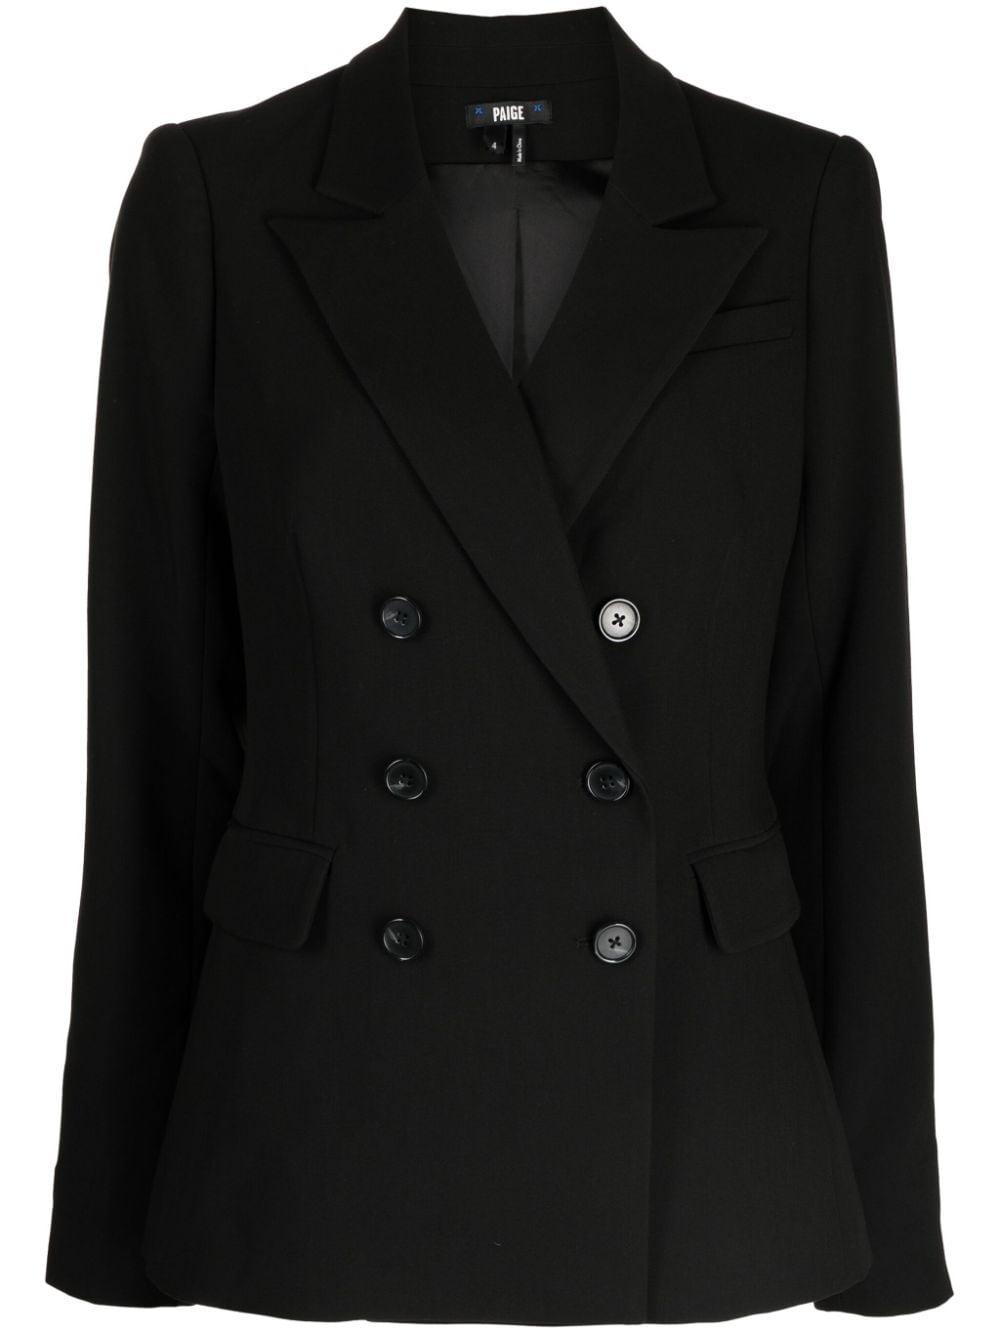 PAIGE Malbec Double-breasted Blazer in Black | Lyst